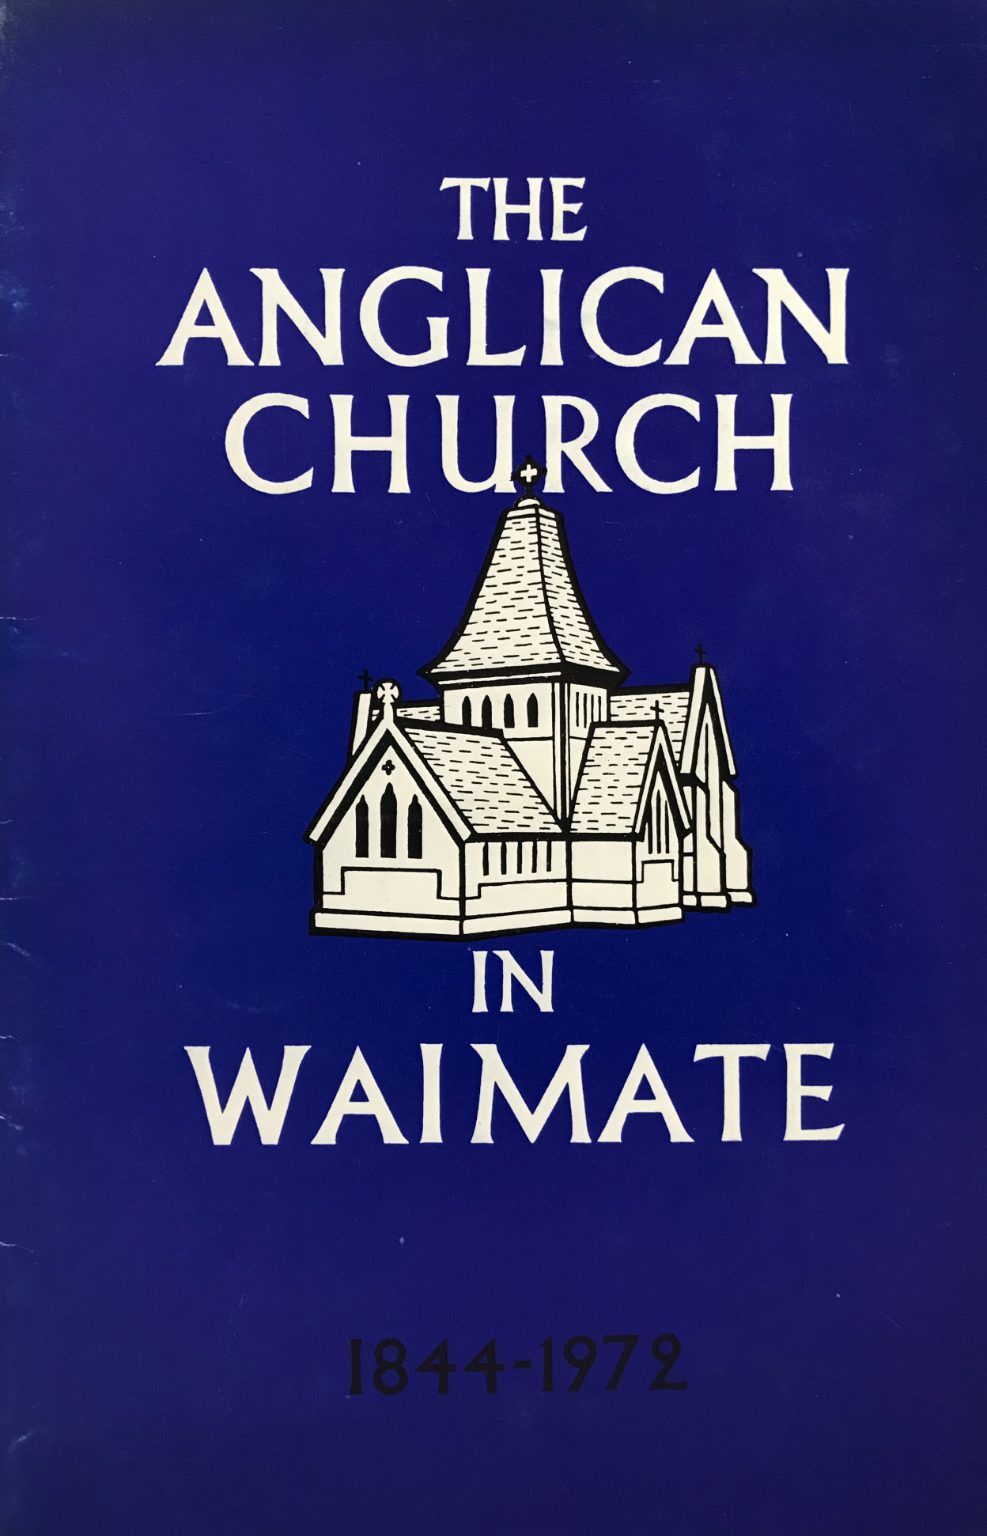 THE ANGLICAN CHURCH IN WAIMATE 1844 to 1972